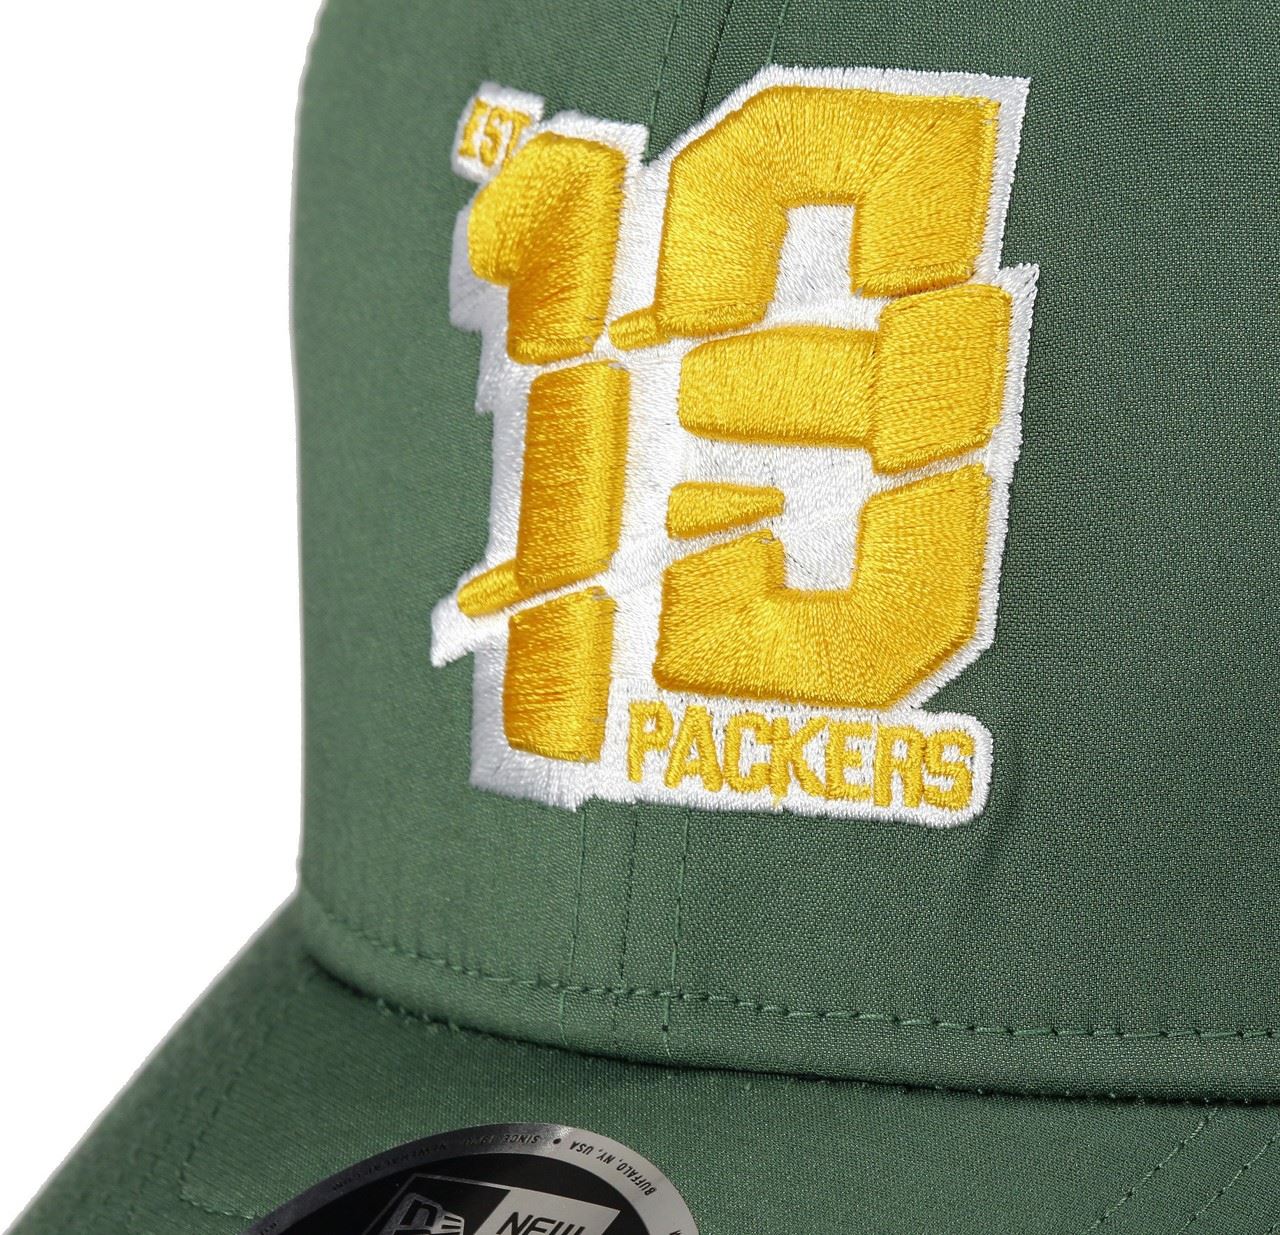 Green Bay Packers Established Number 9Fifty Stretch Snapback Cap New Era 